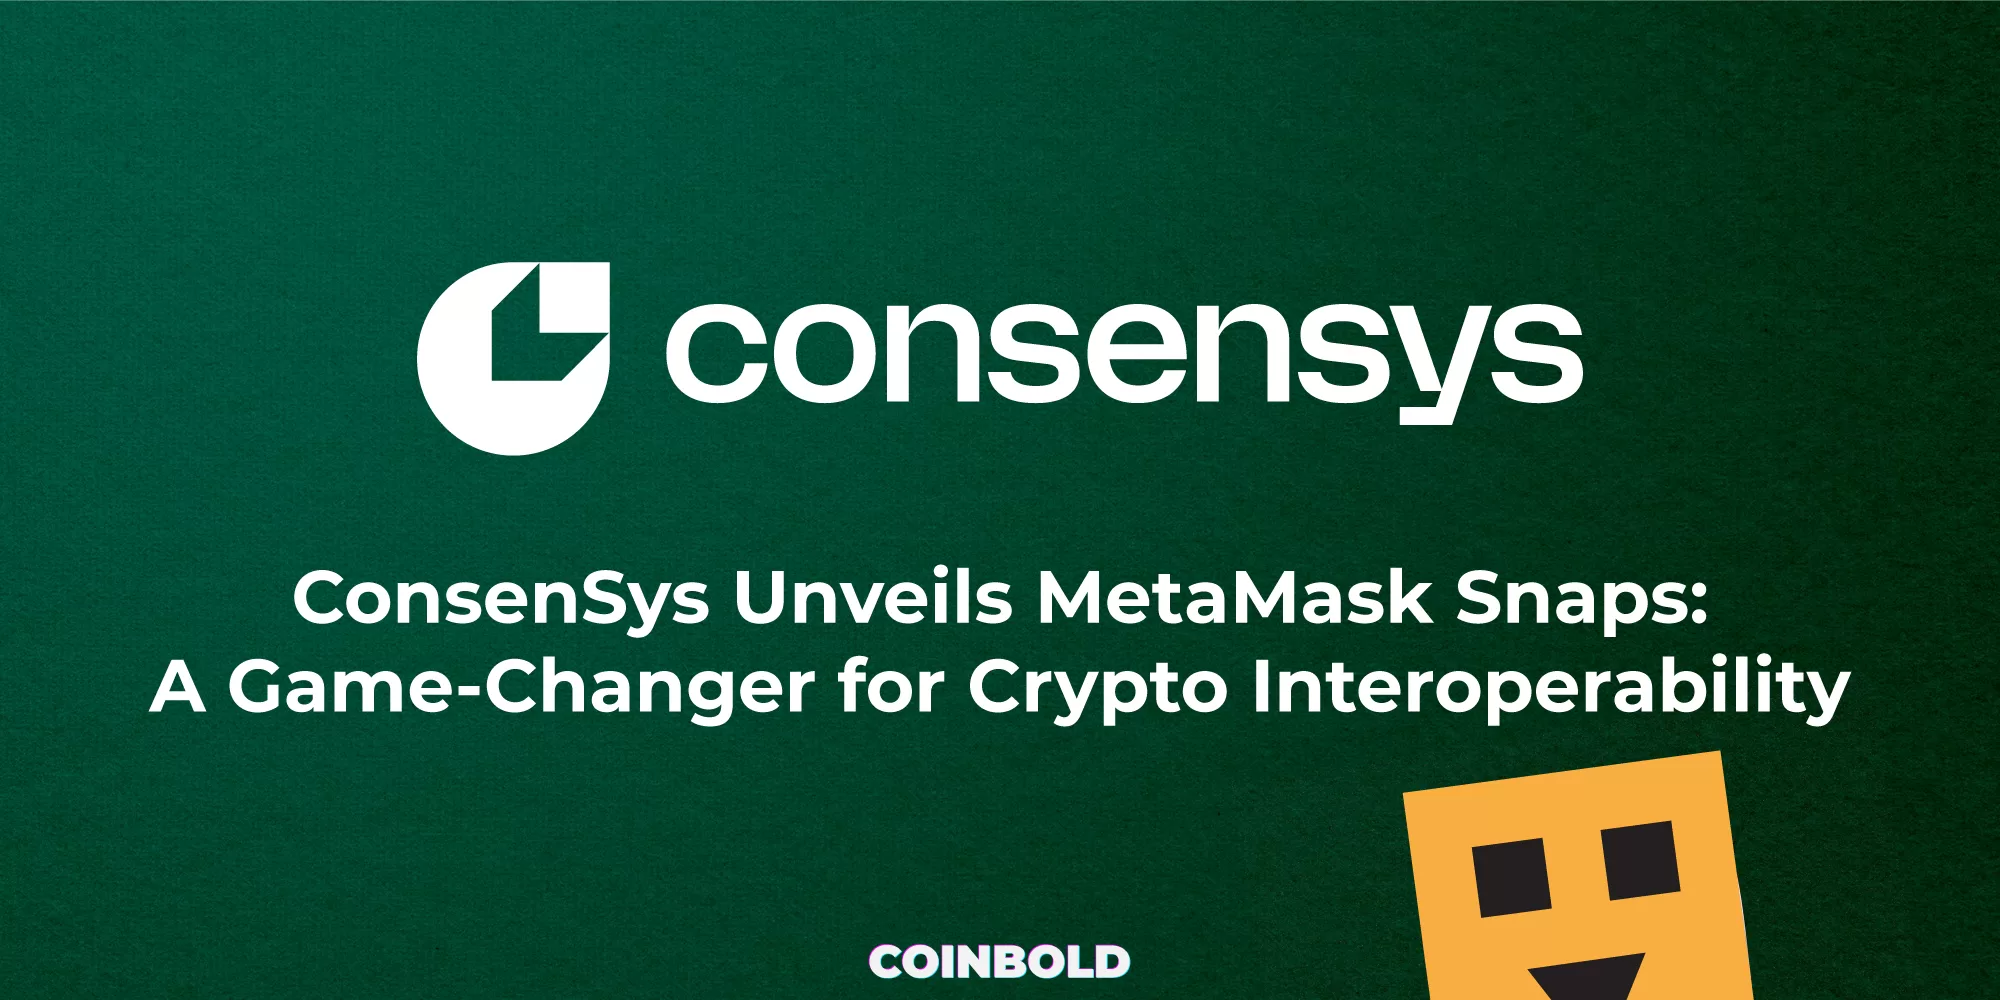 ConsenSys Unveils MetaMask Snaps A Game Changer for Crypto Interoperability